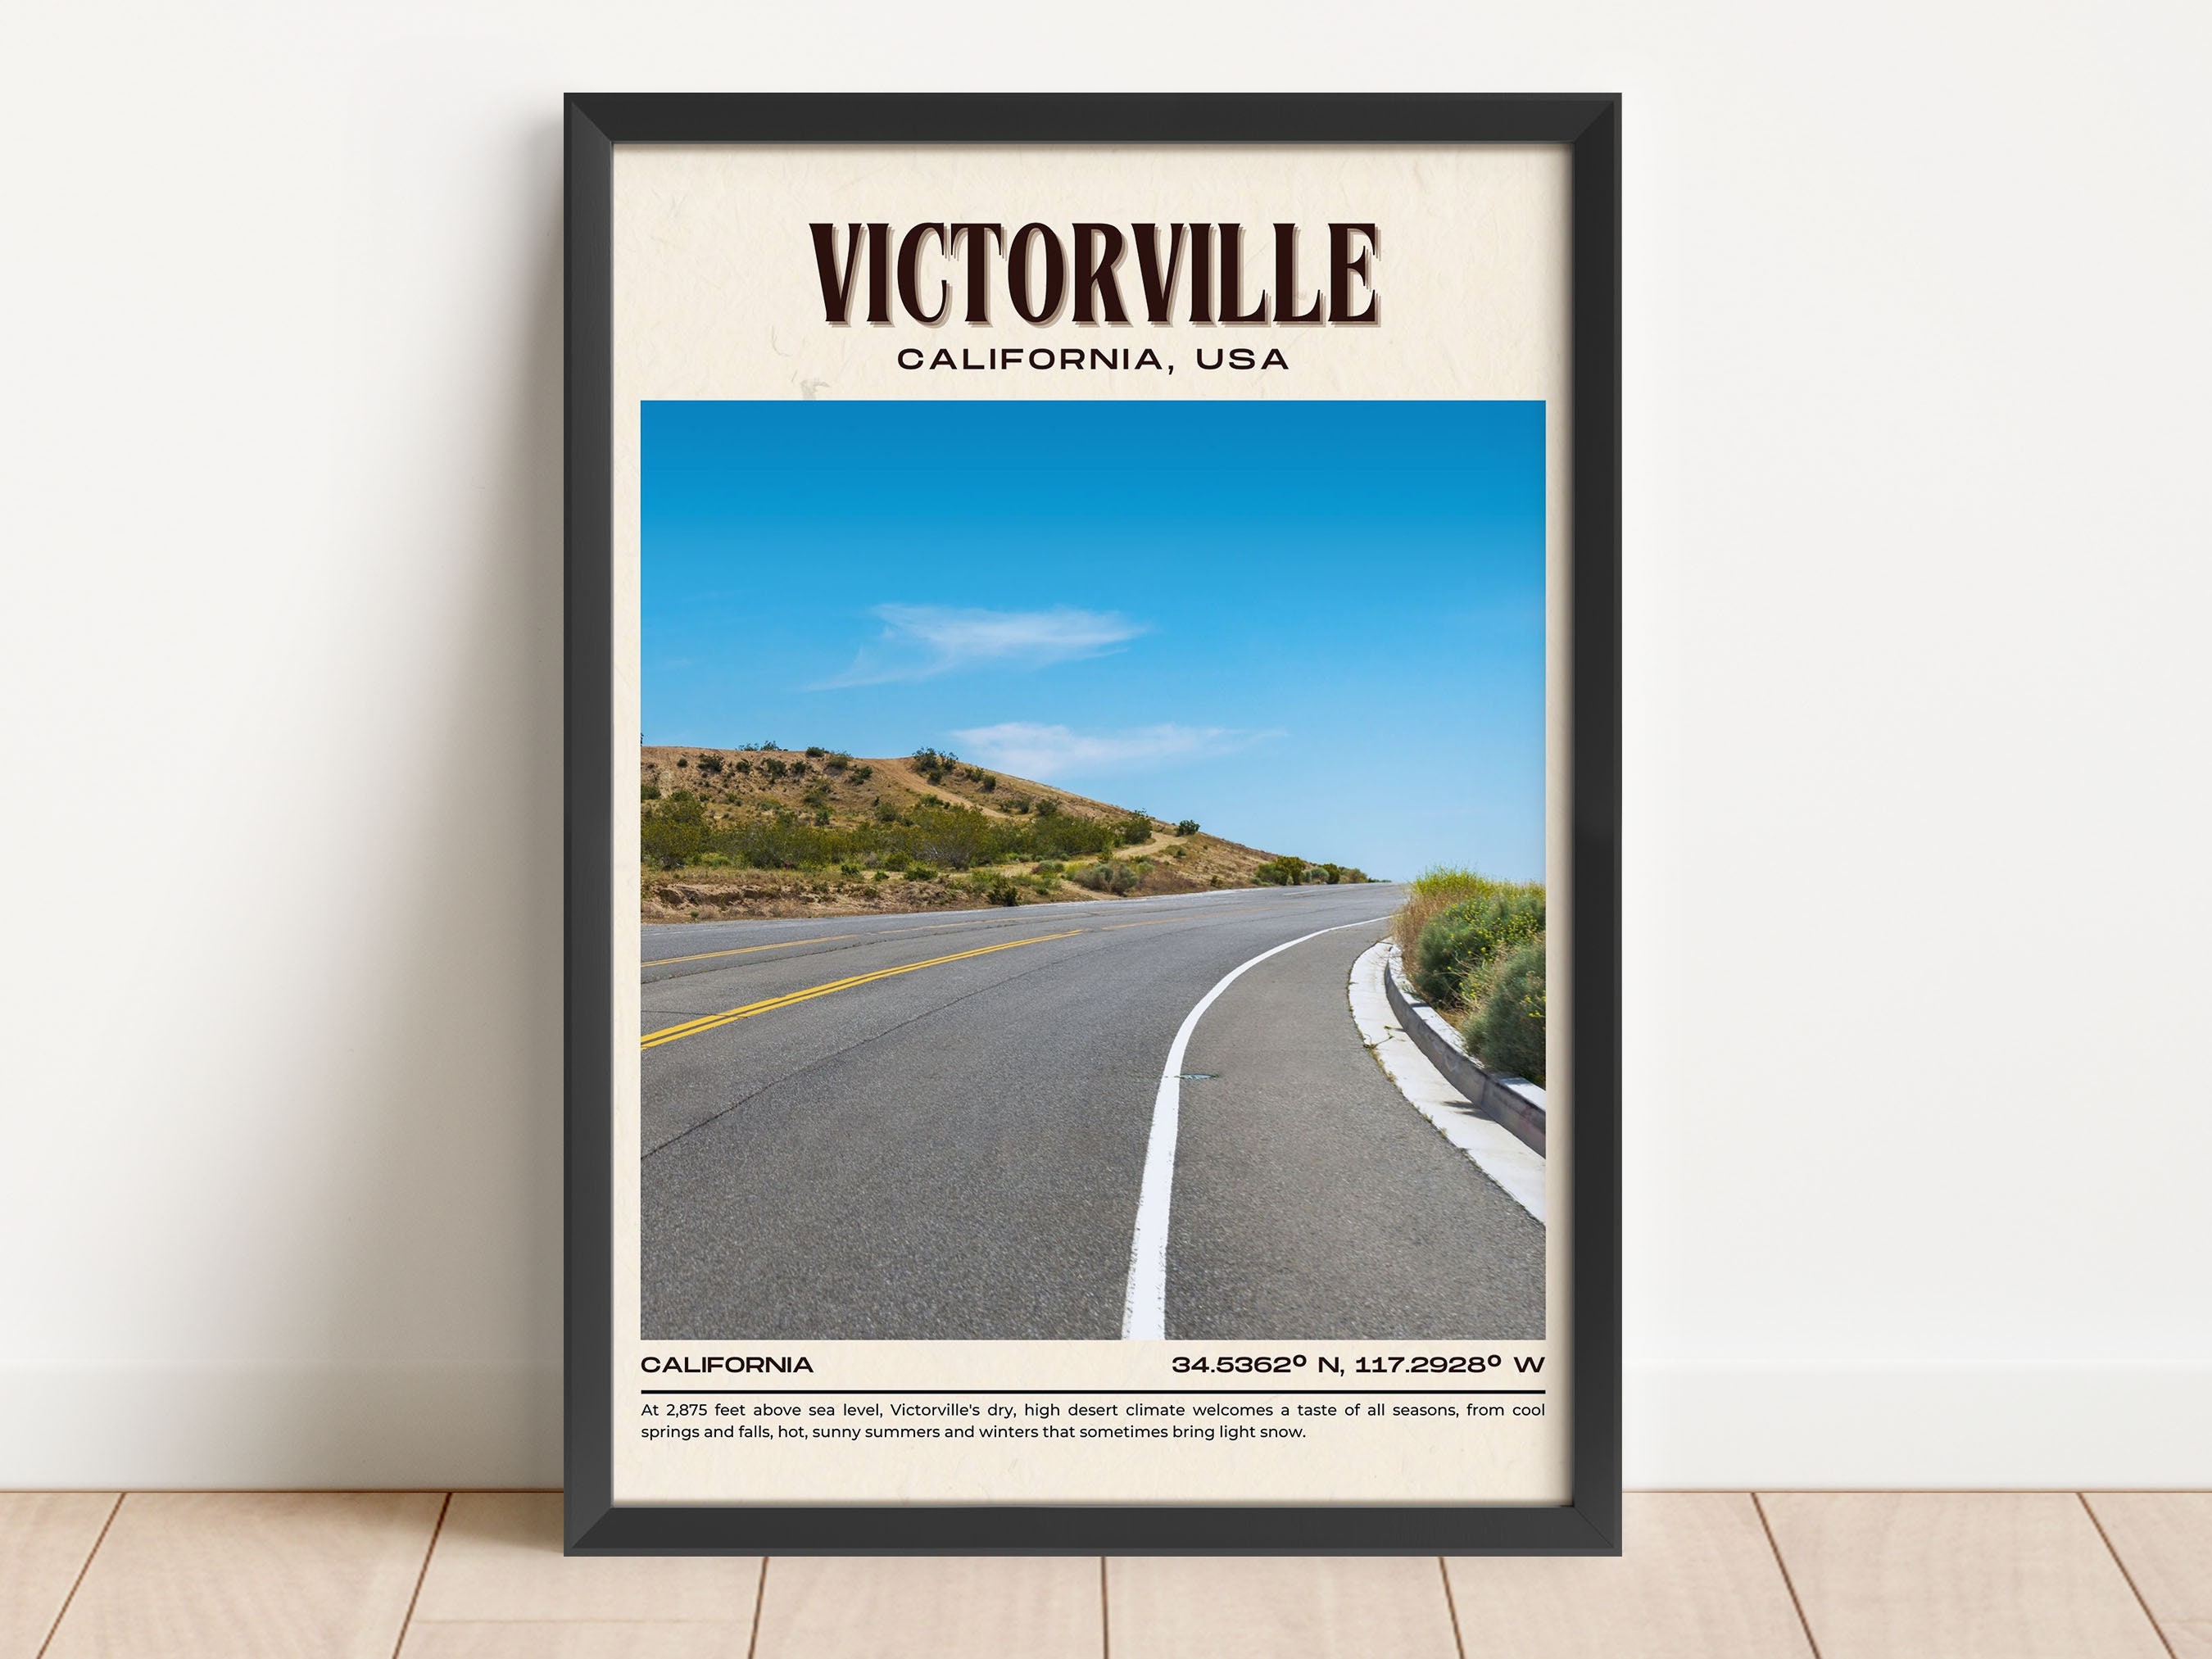 Victorville Maps pic